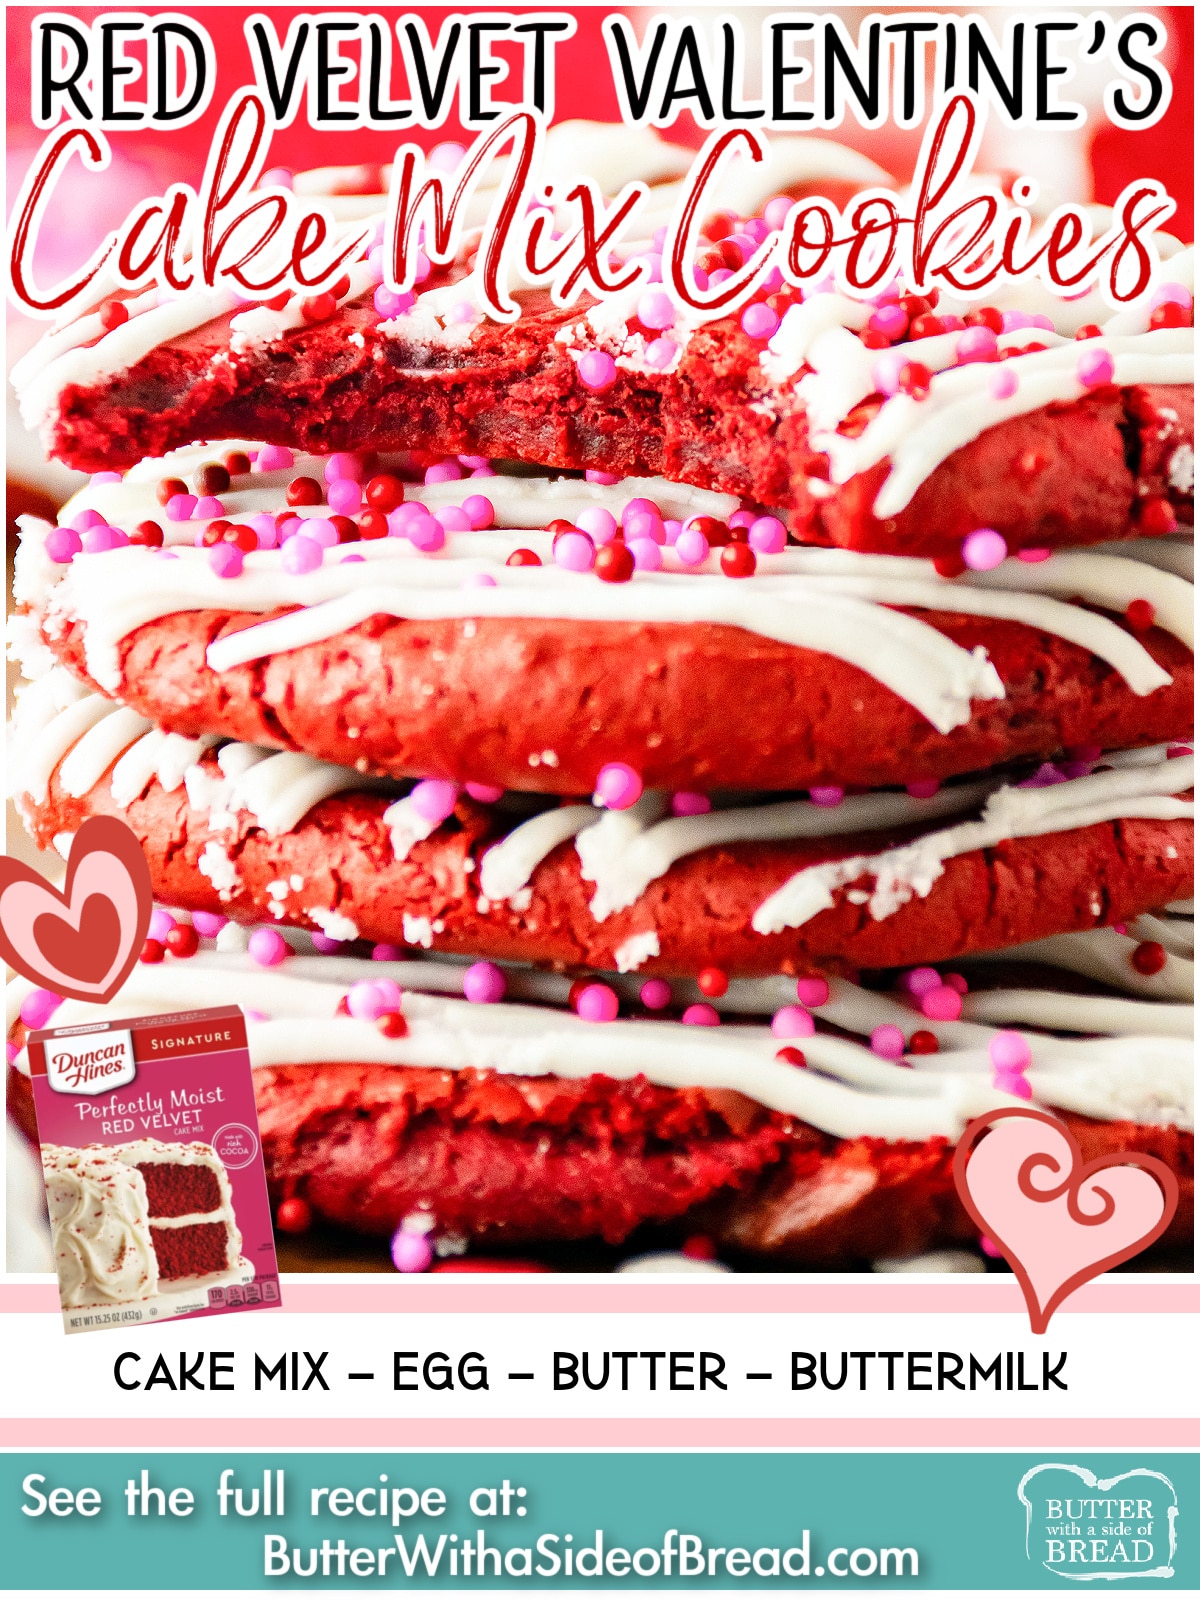 Red Velvet Valentines Cake Mix Cookies have never been easier to make thanks to a cake mix! These Red Velvet Cake Mix Cookies are soft & festive 4 ingredient Valentine's cookies!